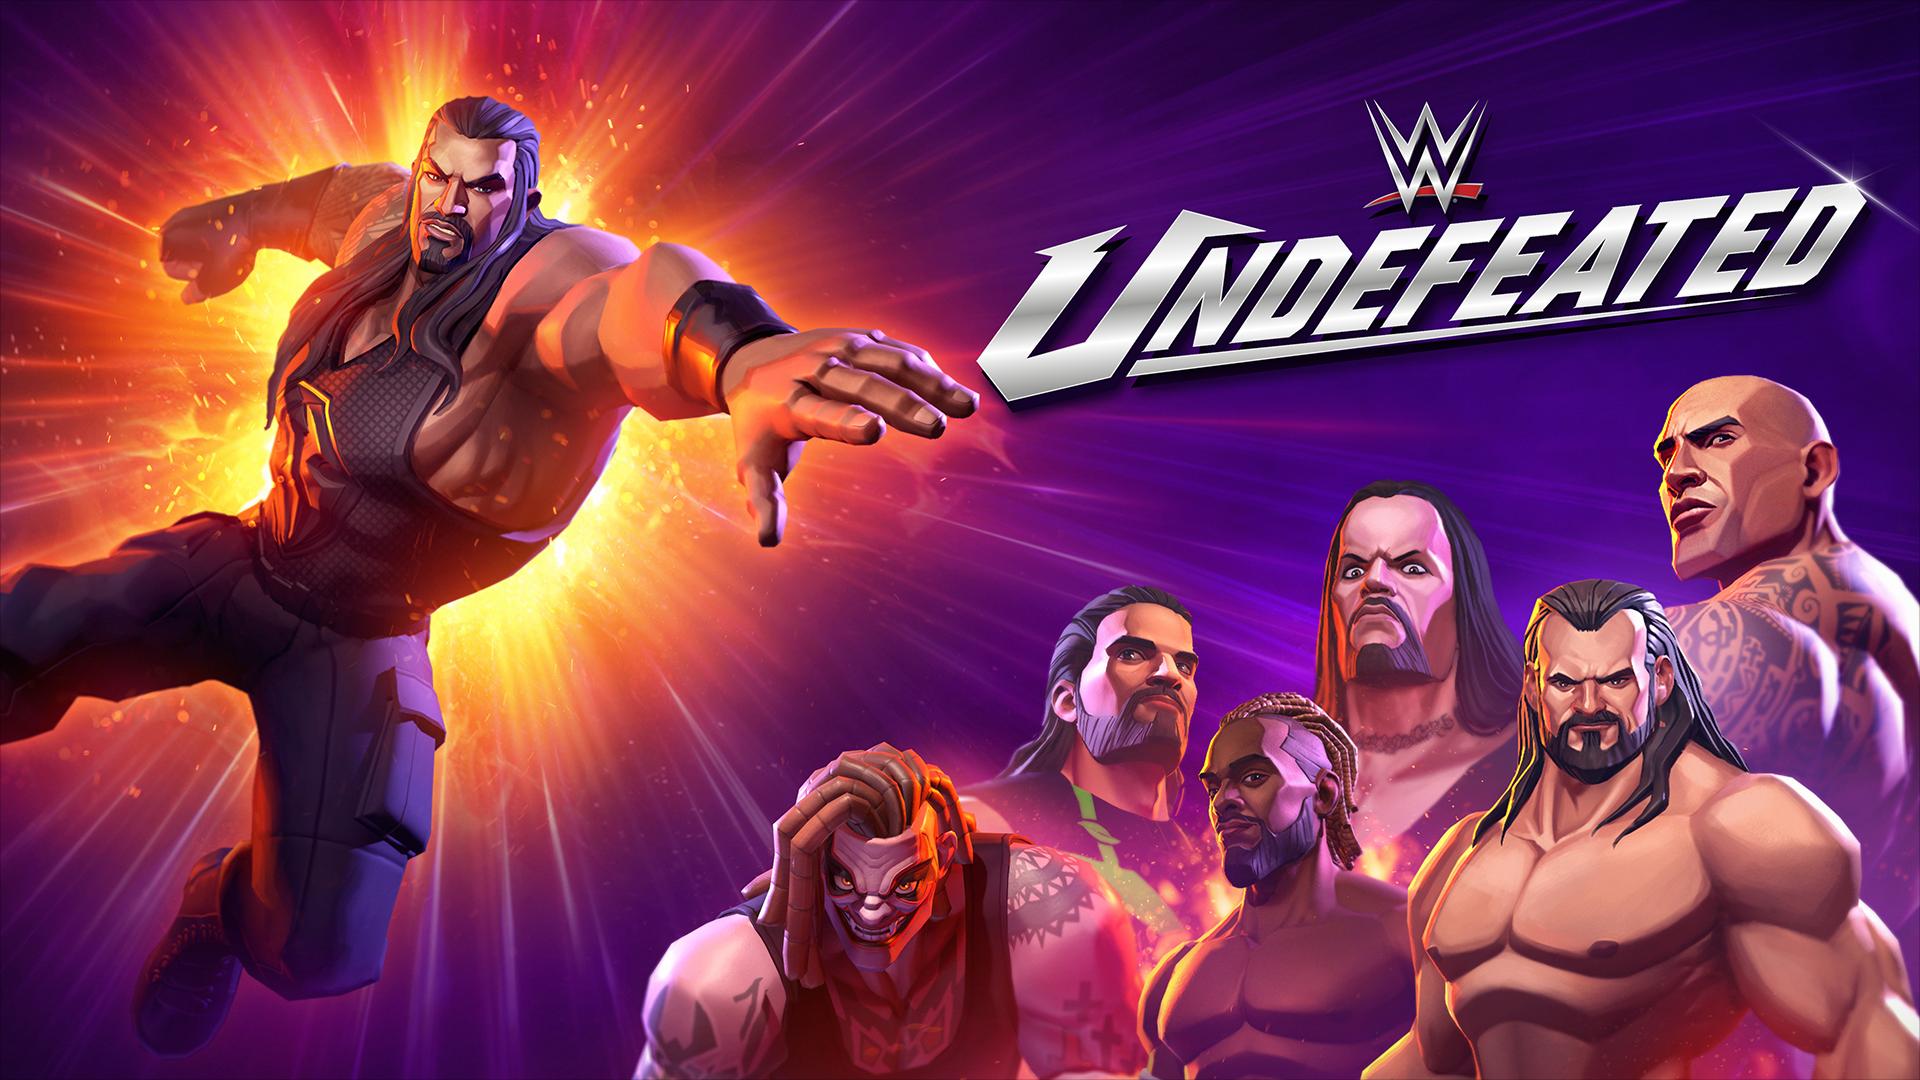 WWE Announces New "Undefeated" Game, Screenshots and Trailer Revealed